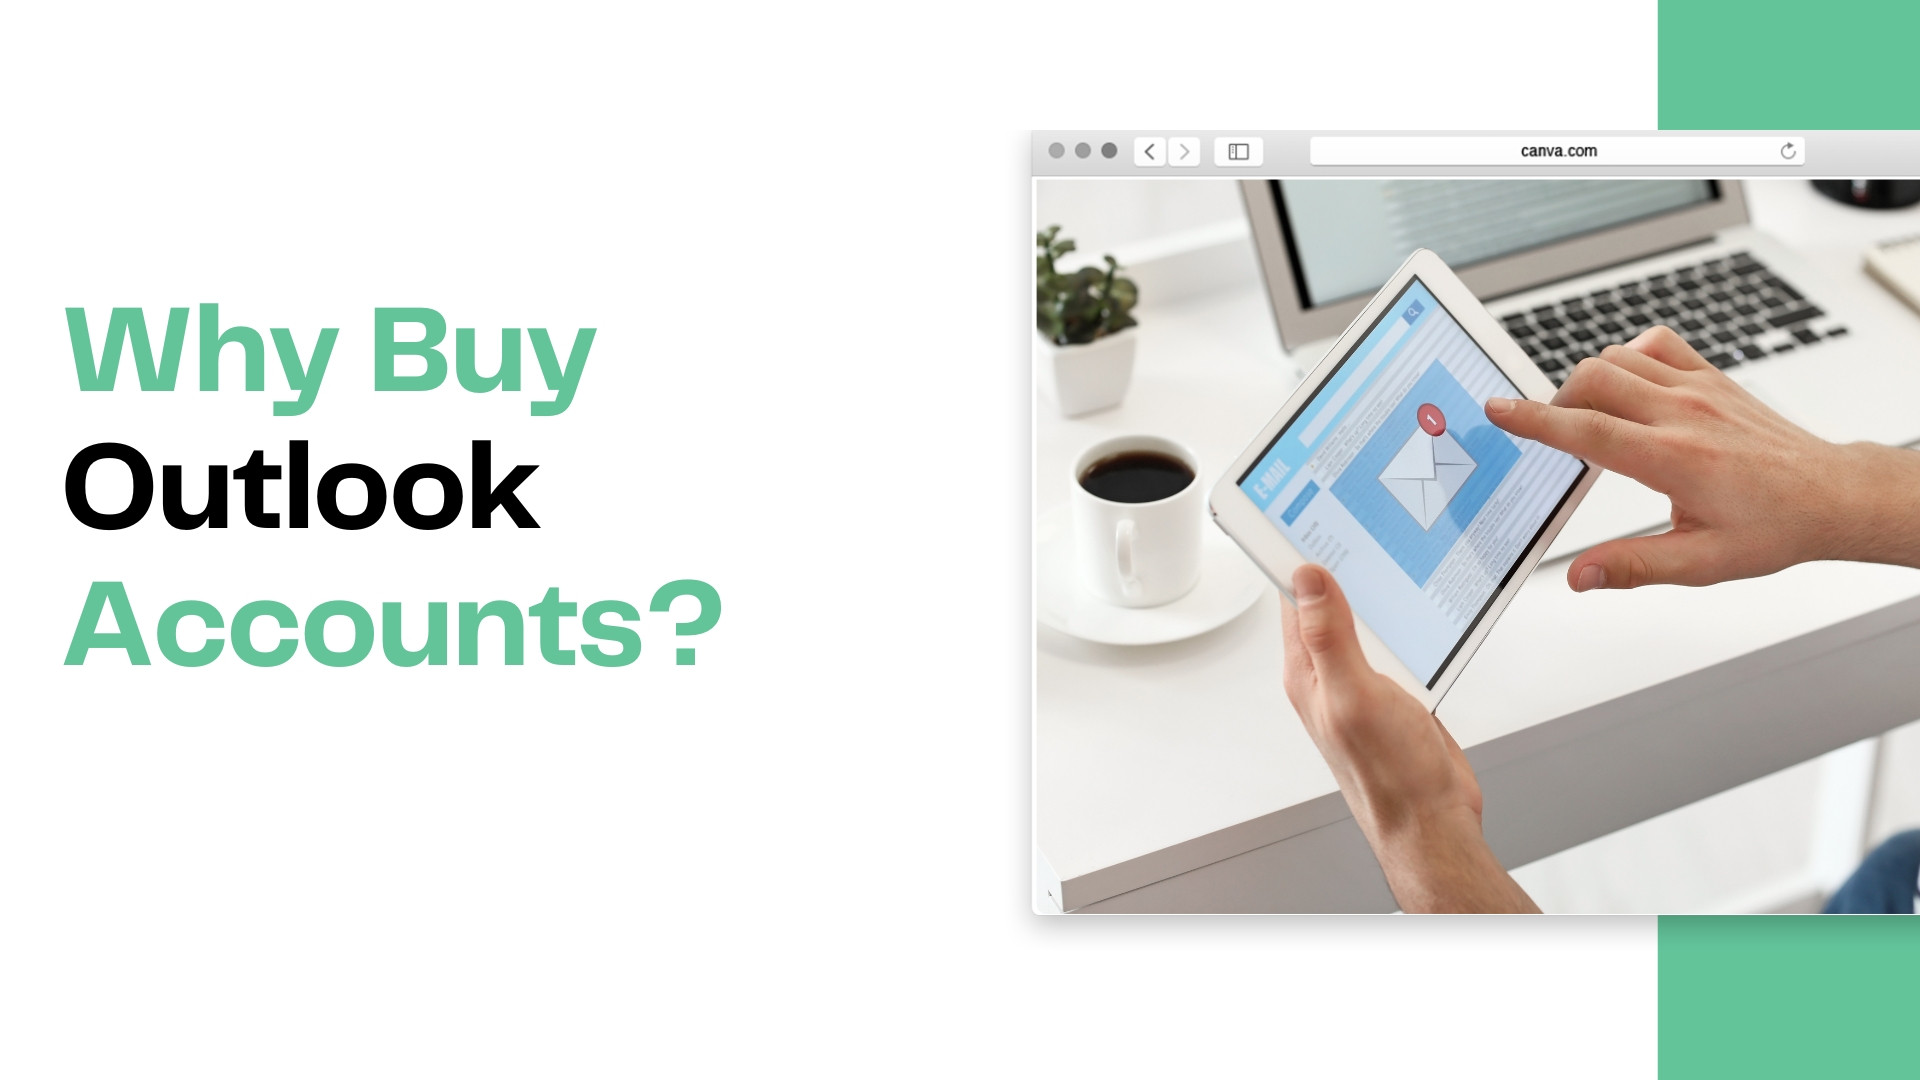 Why Buy Outlook Accounts?